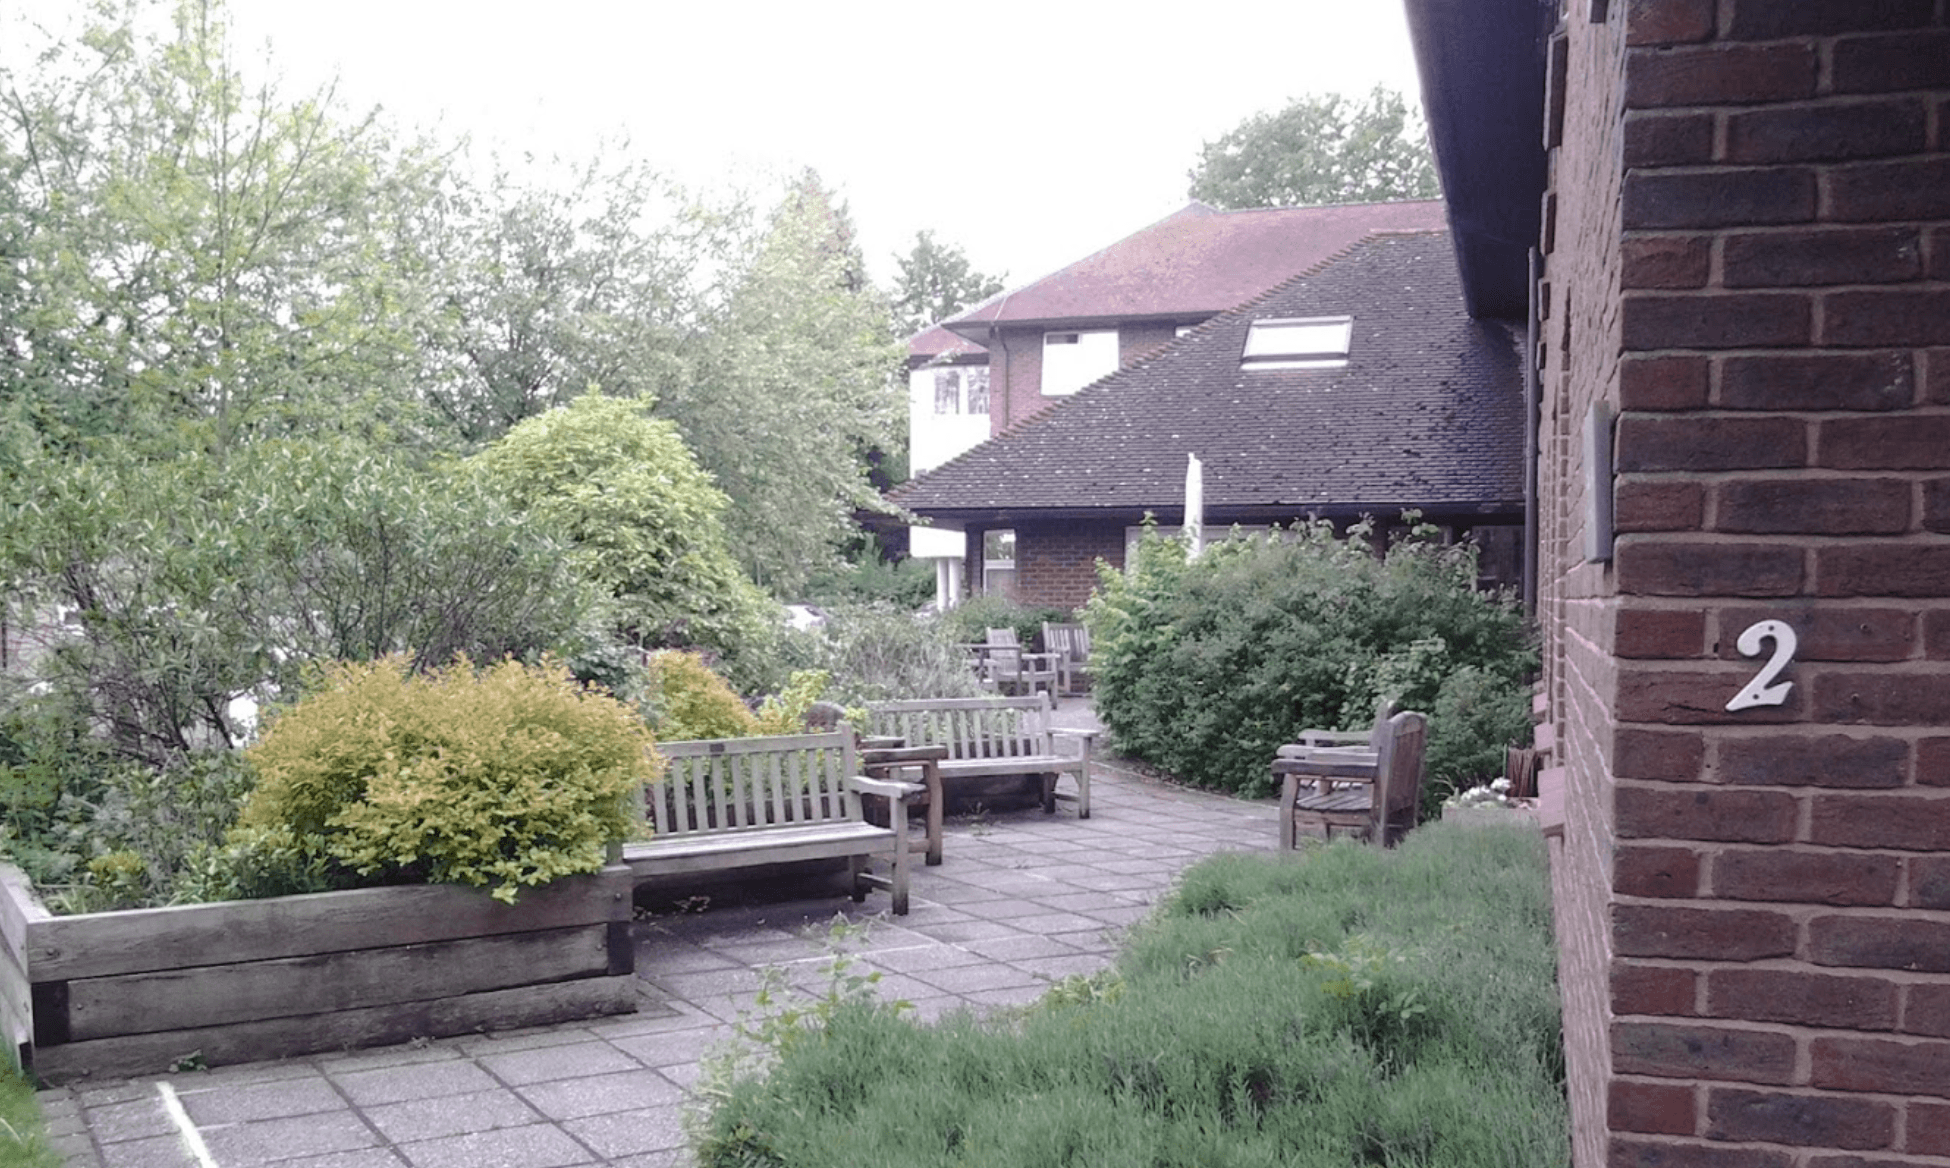 David Greesham House Residential Care Home in Oxted 10